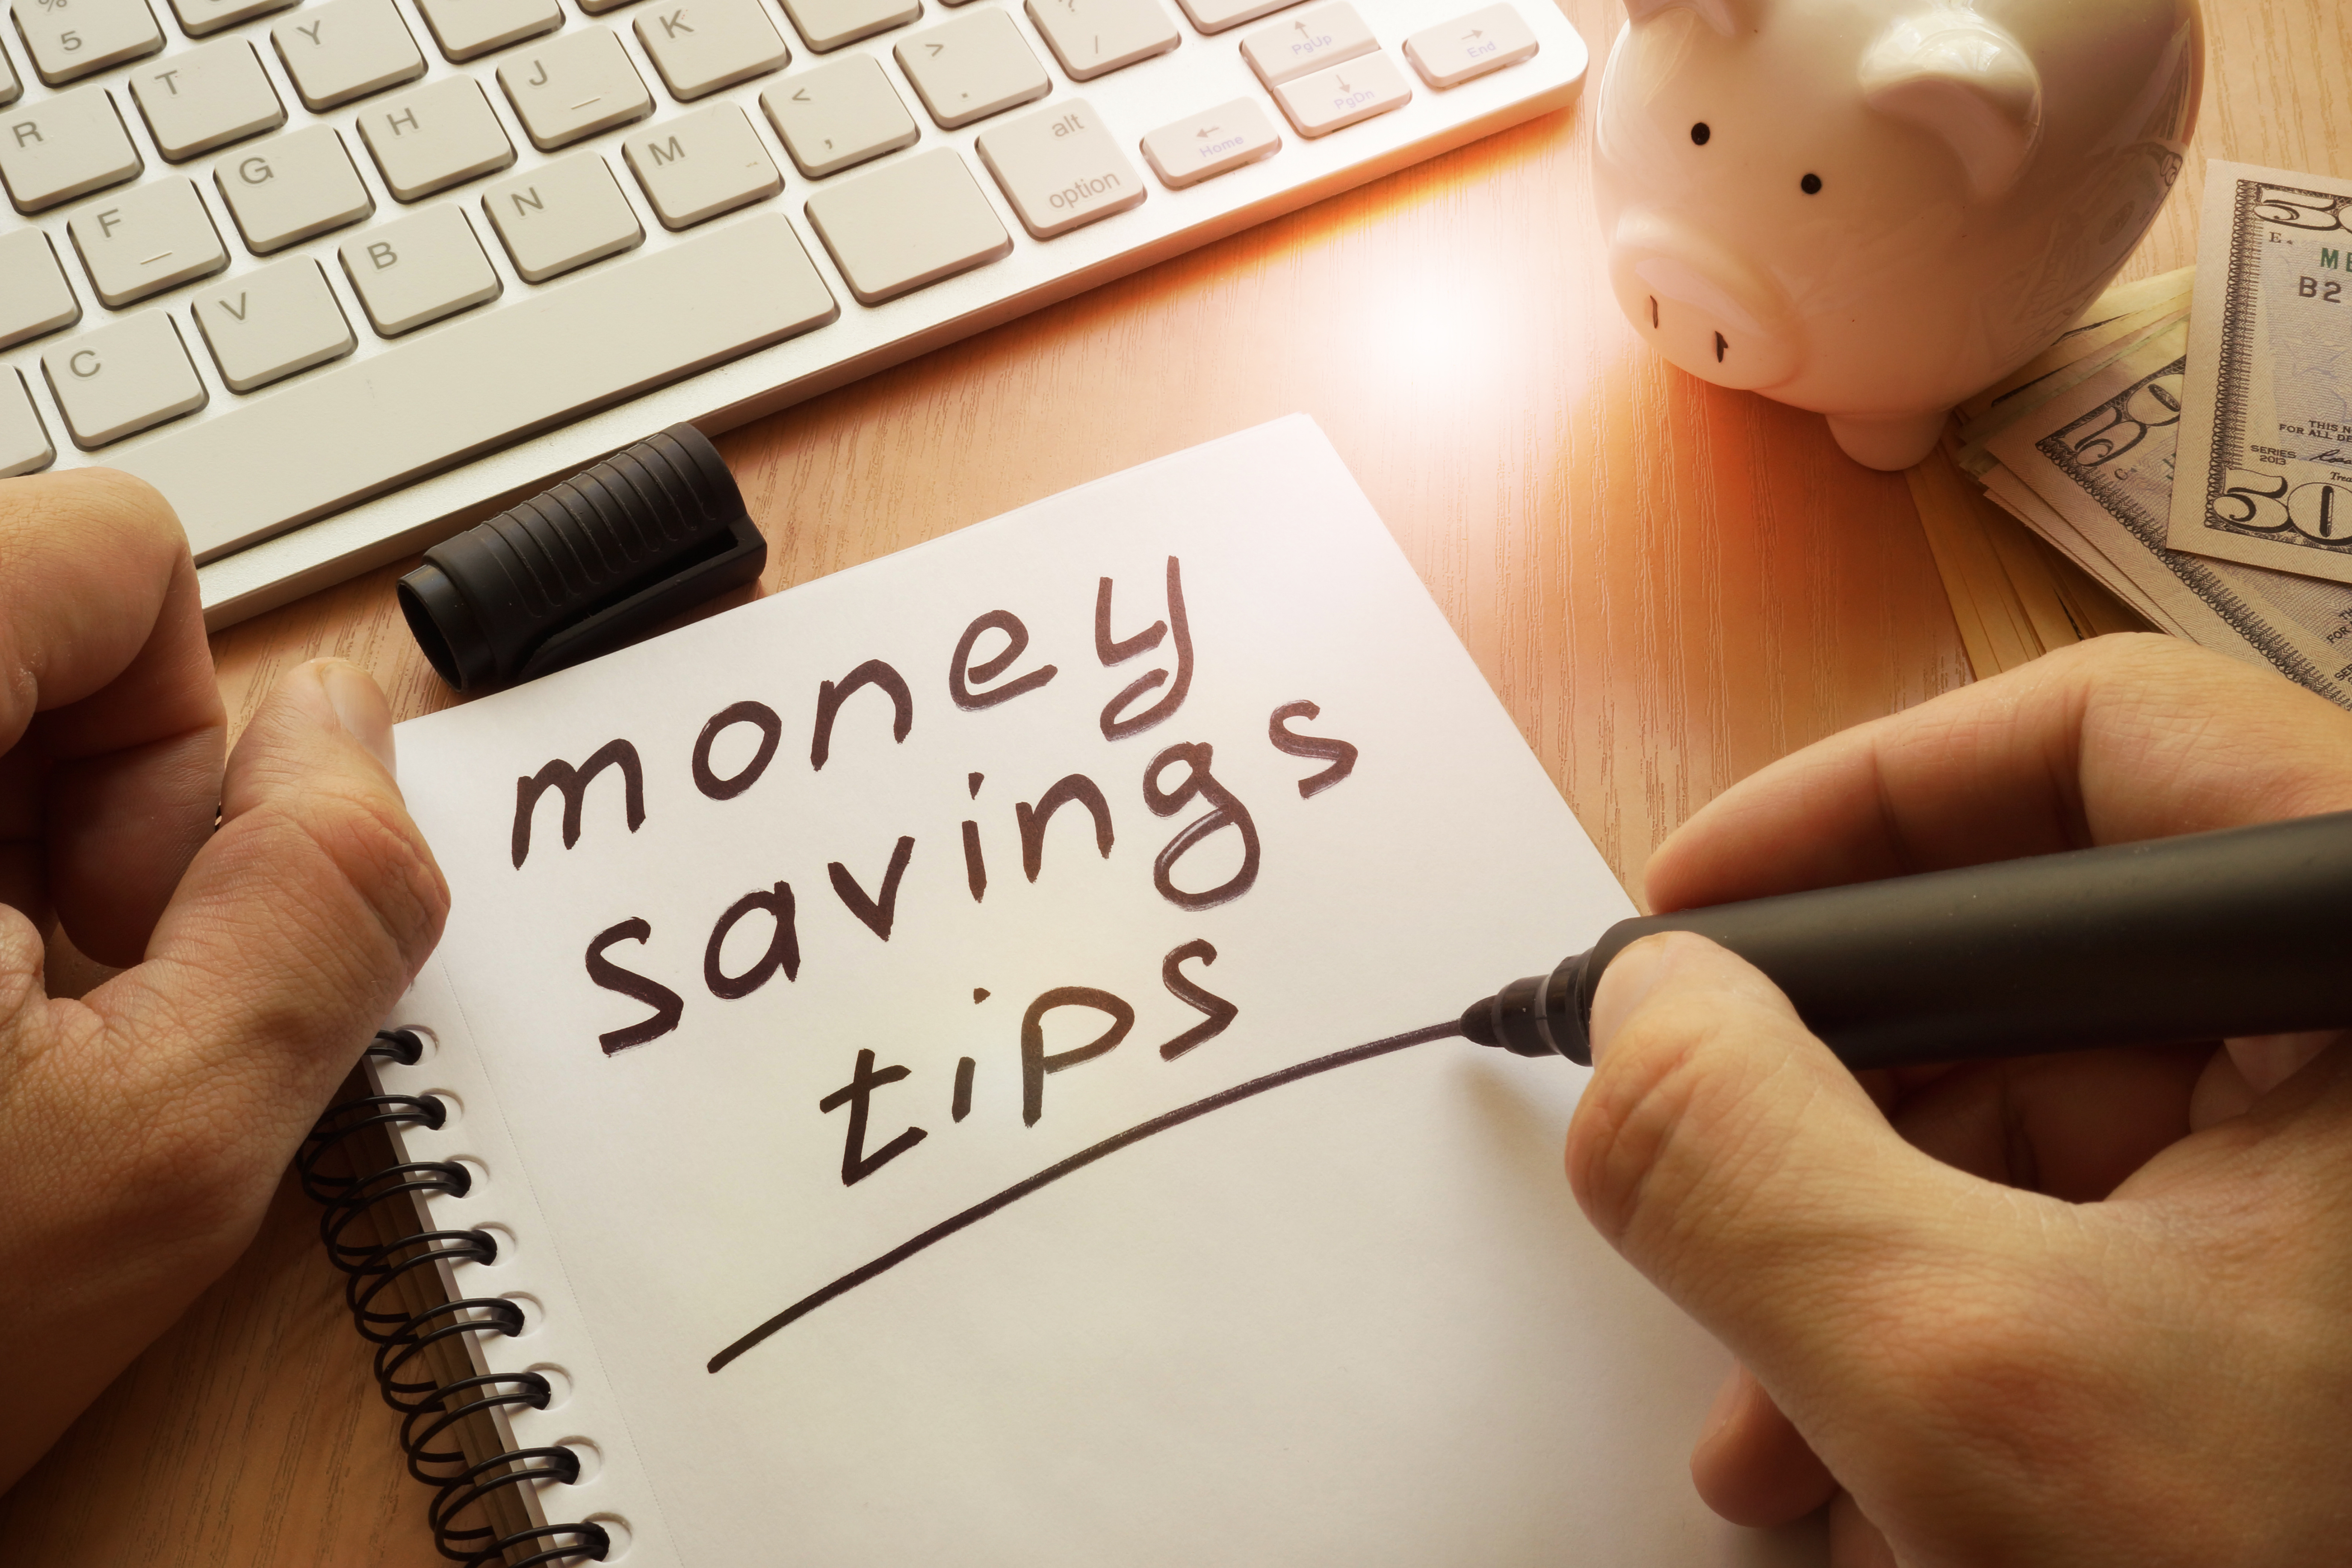 note pad that says "money saving tips"